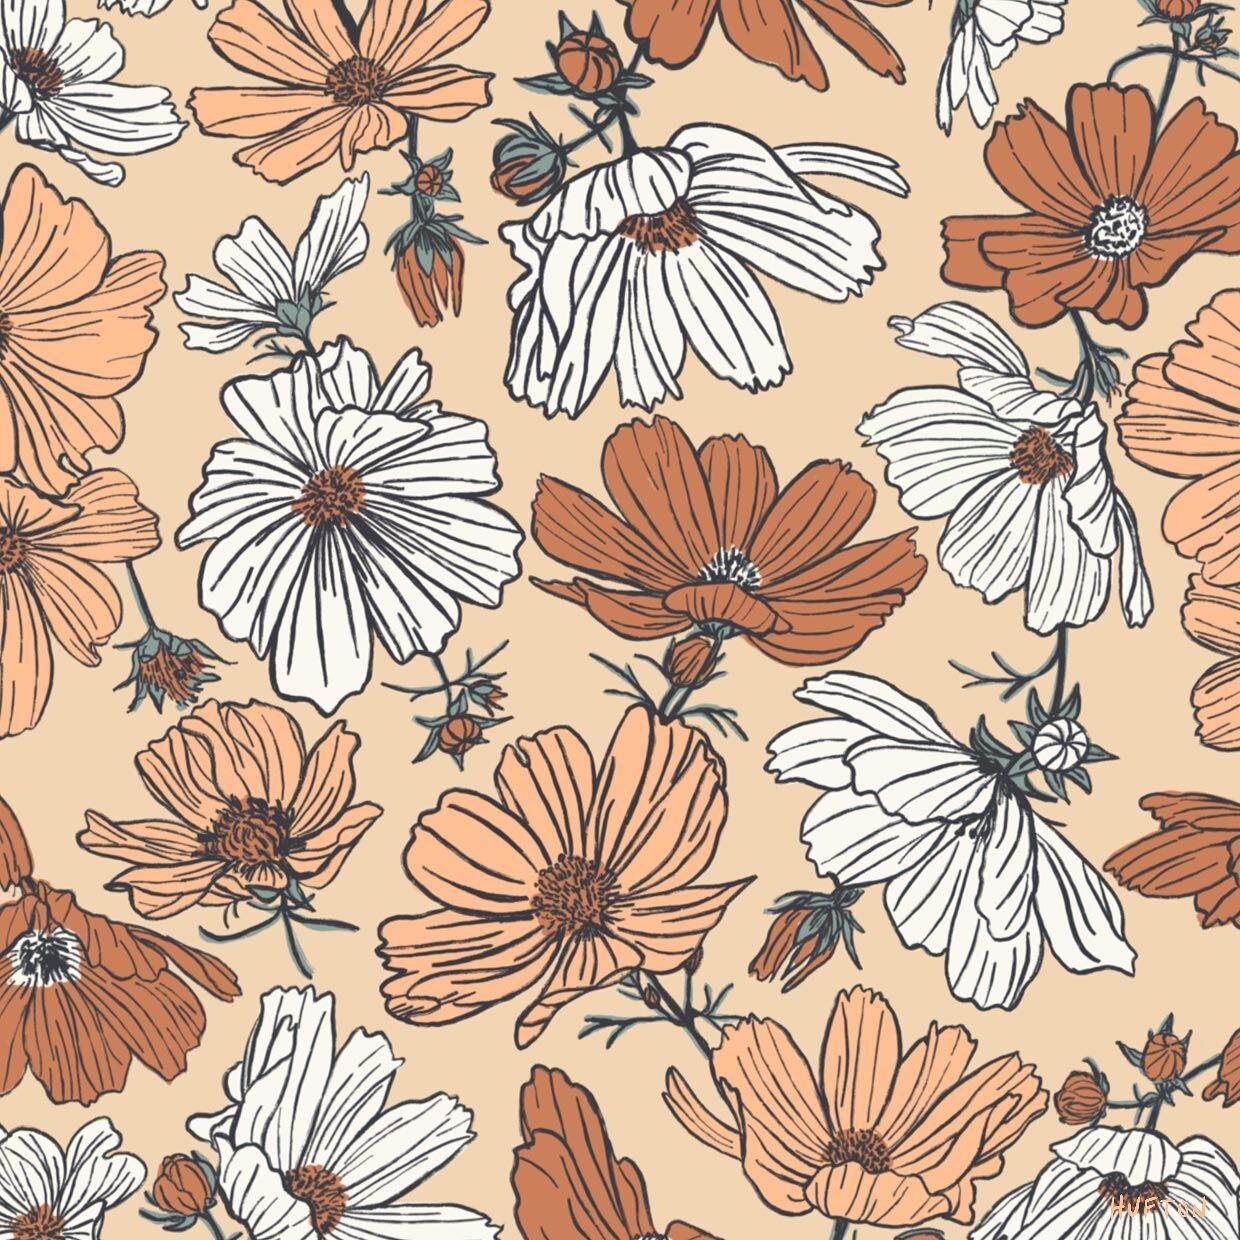 Summertime floral - I draw this pretty floral last year and built a collection around it called &ldquo;Pretty little Things&rdquo;. The process of building a collection can take along time &amp; this collection felt like it had its ups and downs. 
I 